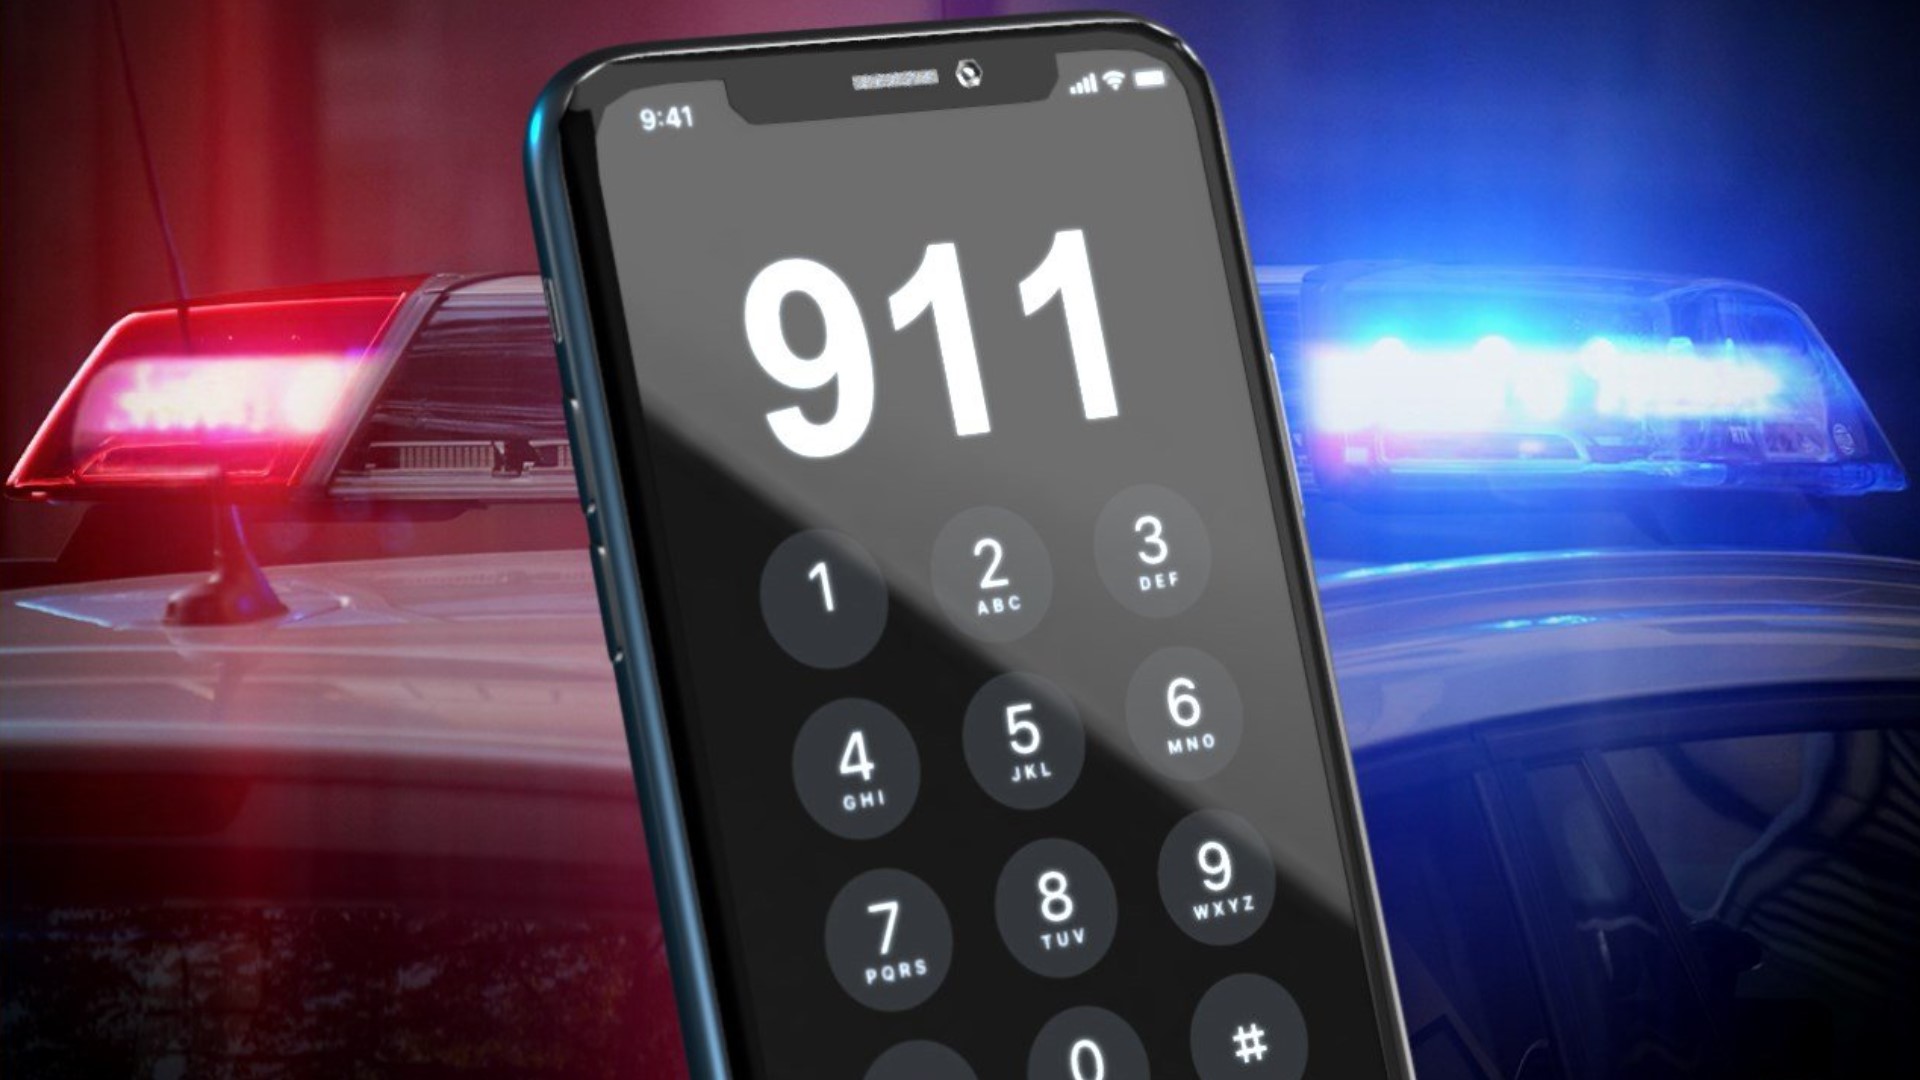 Phone calls to 911 in several Indiana counties were disrupted for more than two hours Tuesday night.